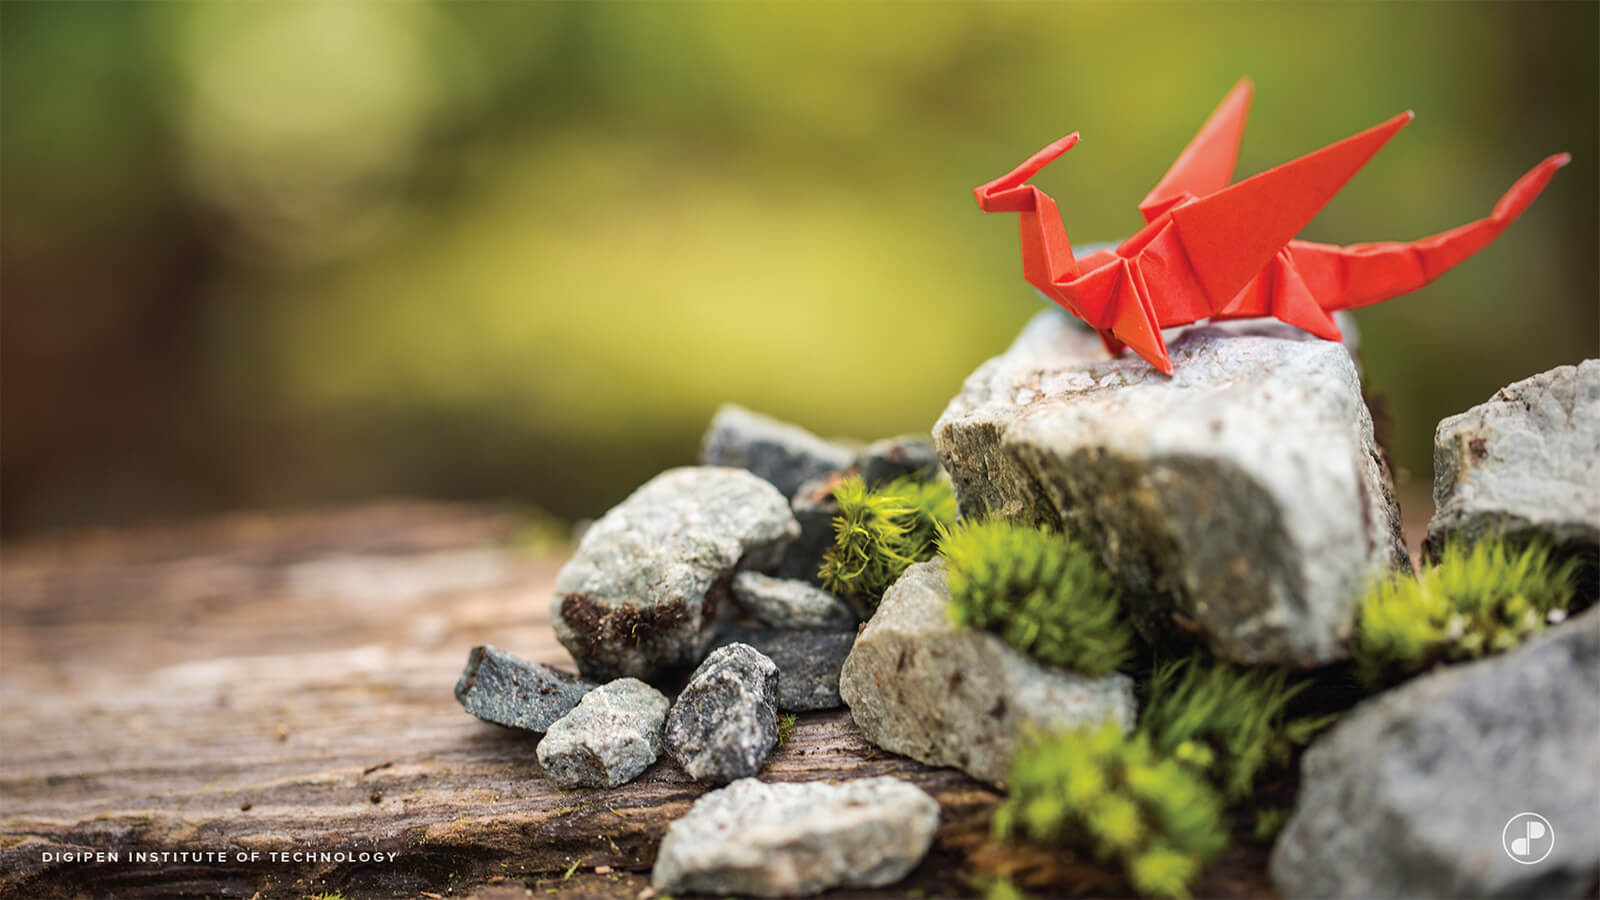 A red paper origami dragon perched on a rock